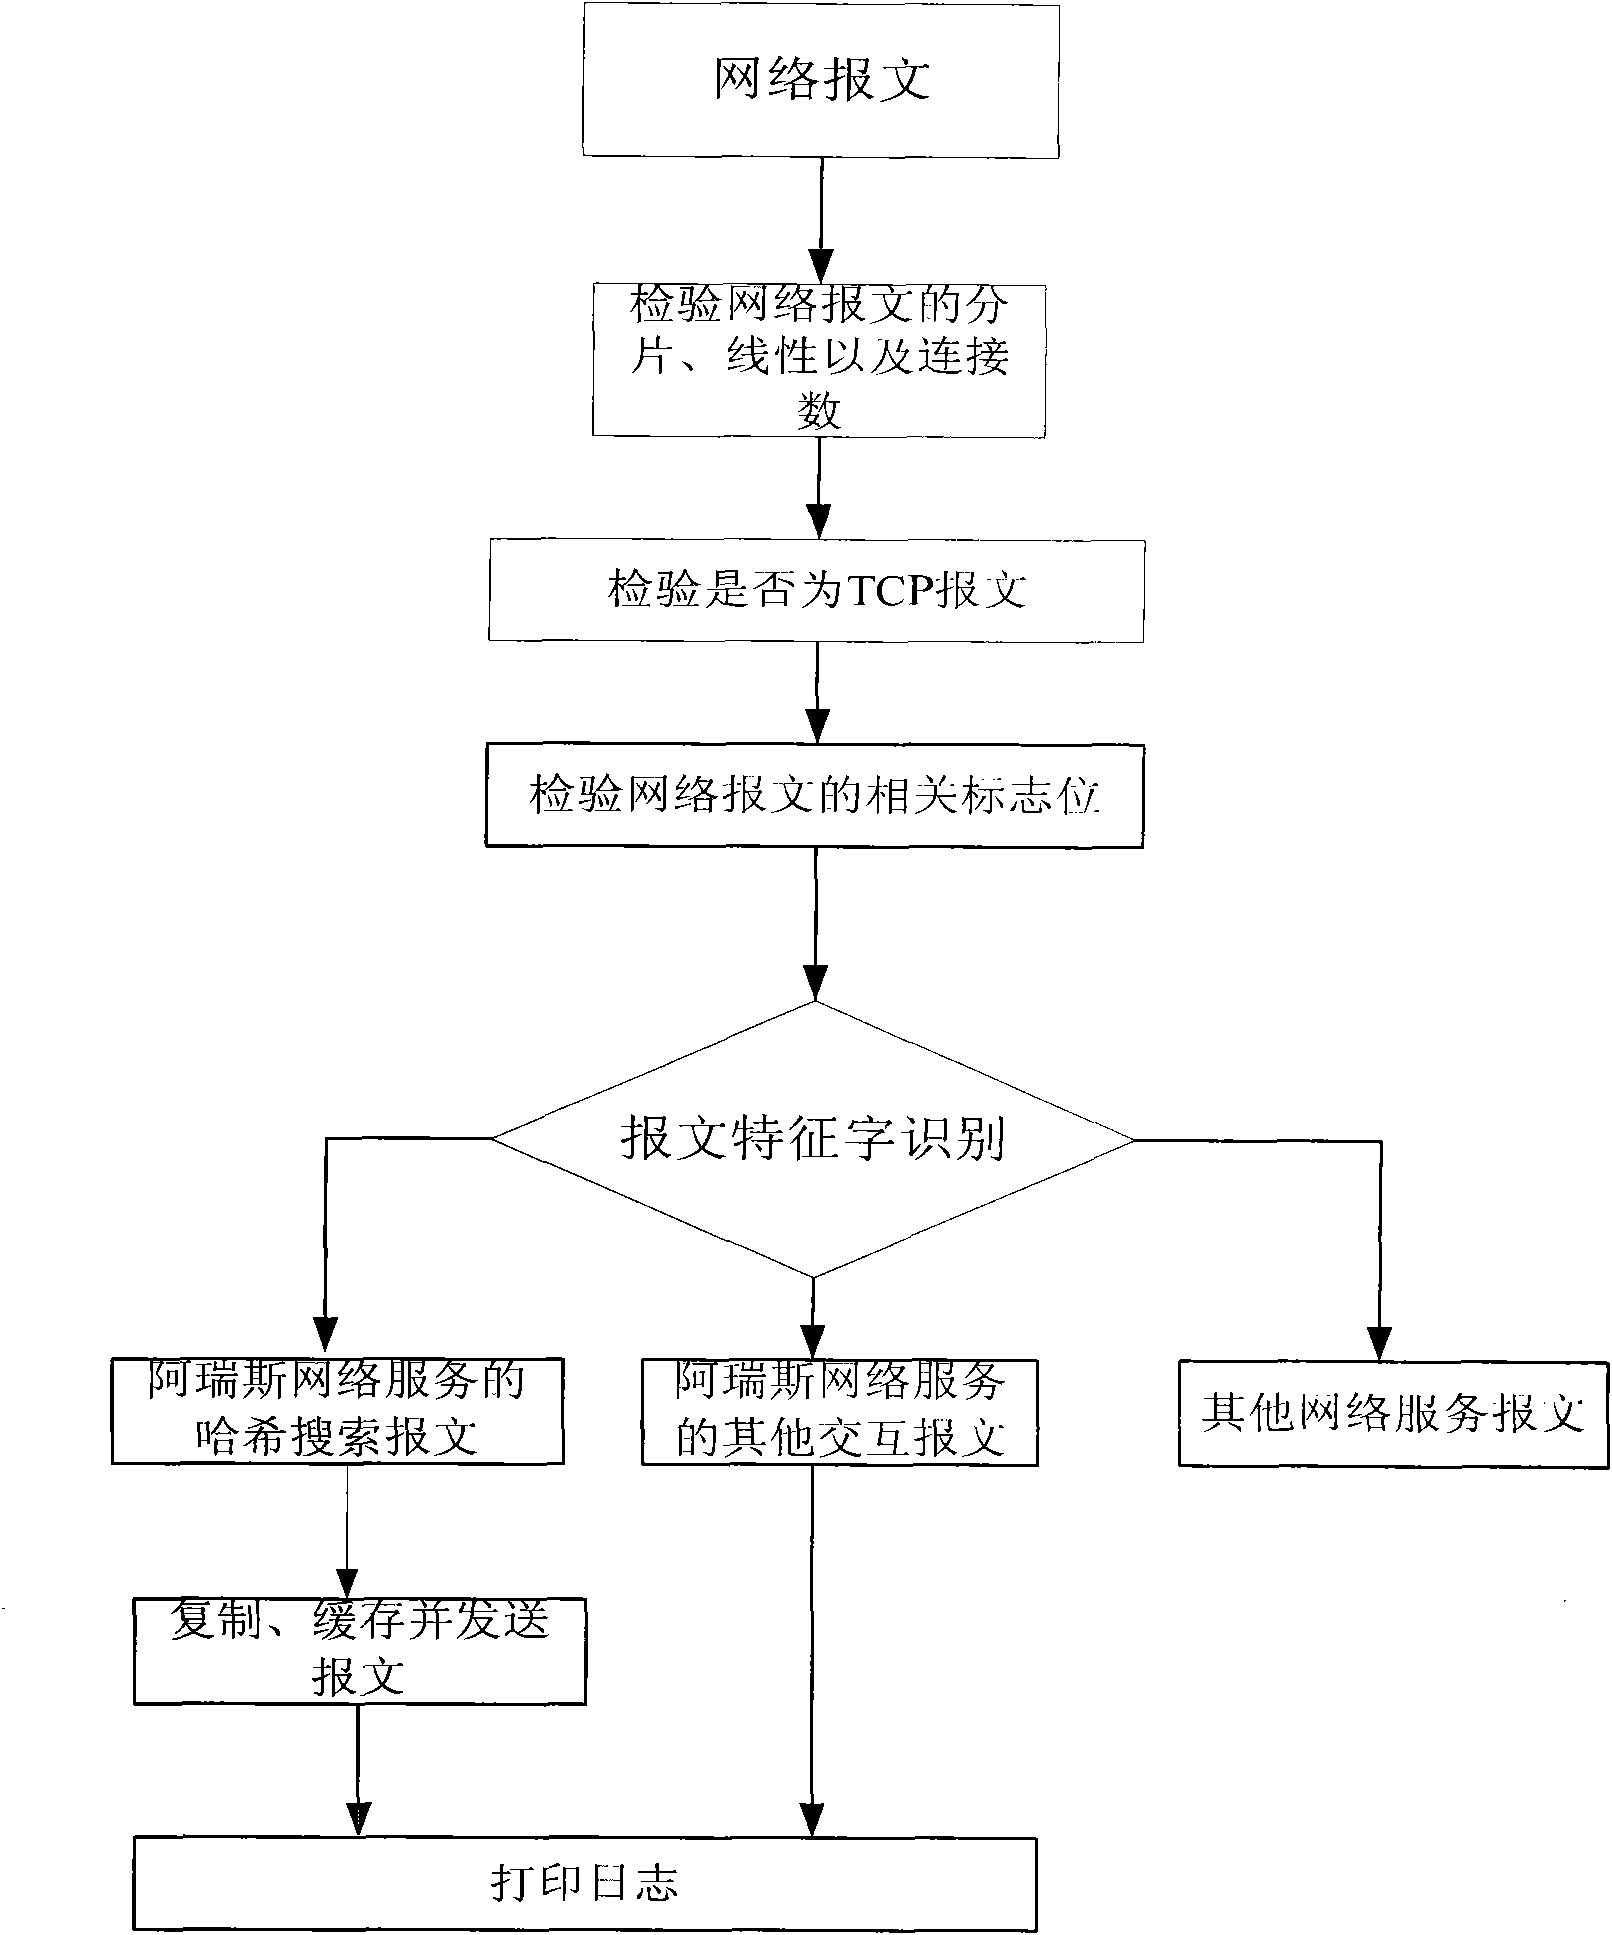 Realization method of ares protocol analysis system based on peer-to-peer network